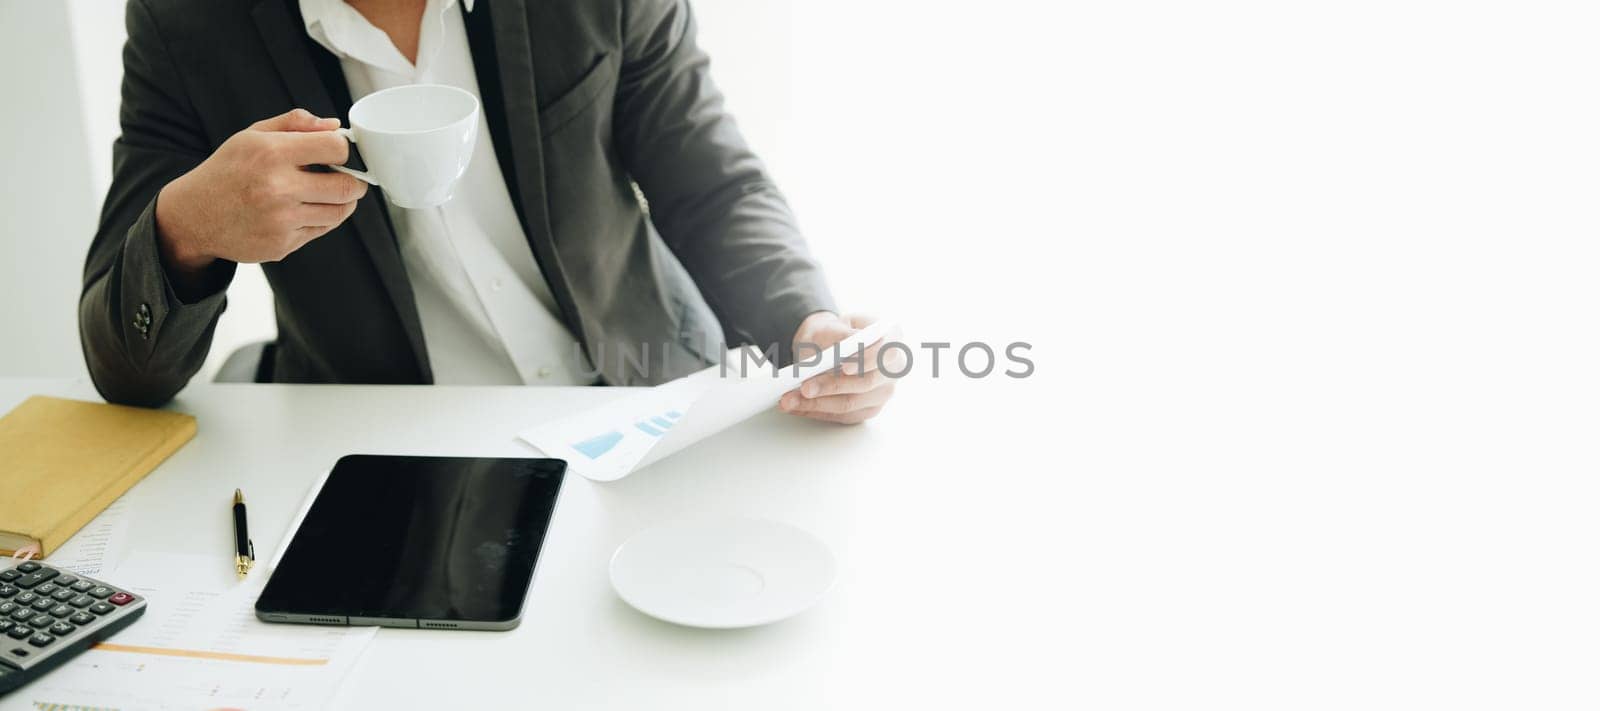 Portrait of a young Asian woman showing a smiling face as she uses his phone, computer and financial documents on her desk in the early morning hours by Manastrong